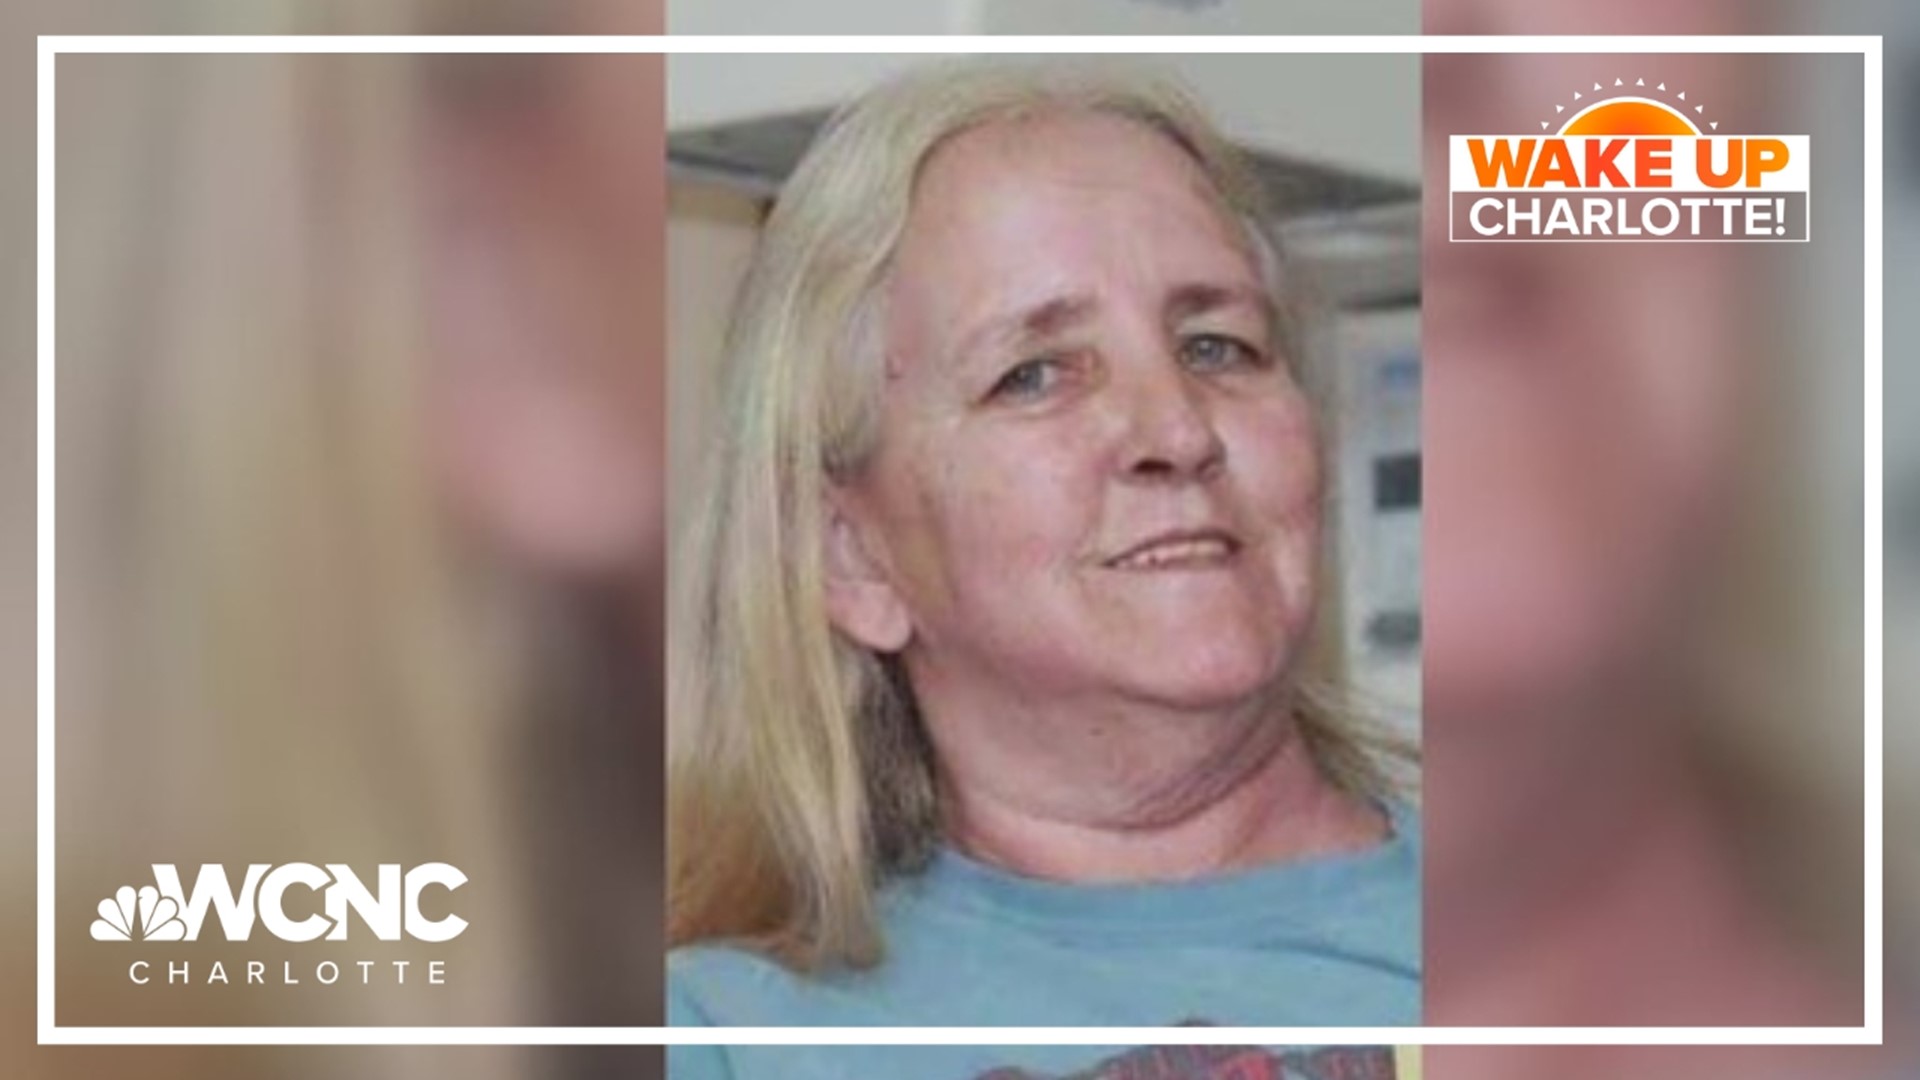 Back in August of 2021, authorities say Linda Robinson's body was found on the side of the road in Chester County.